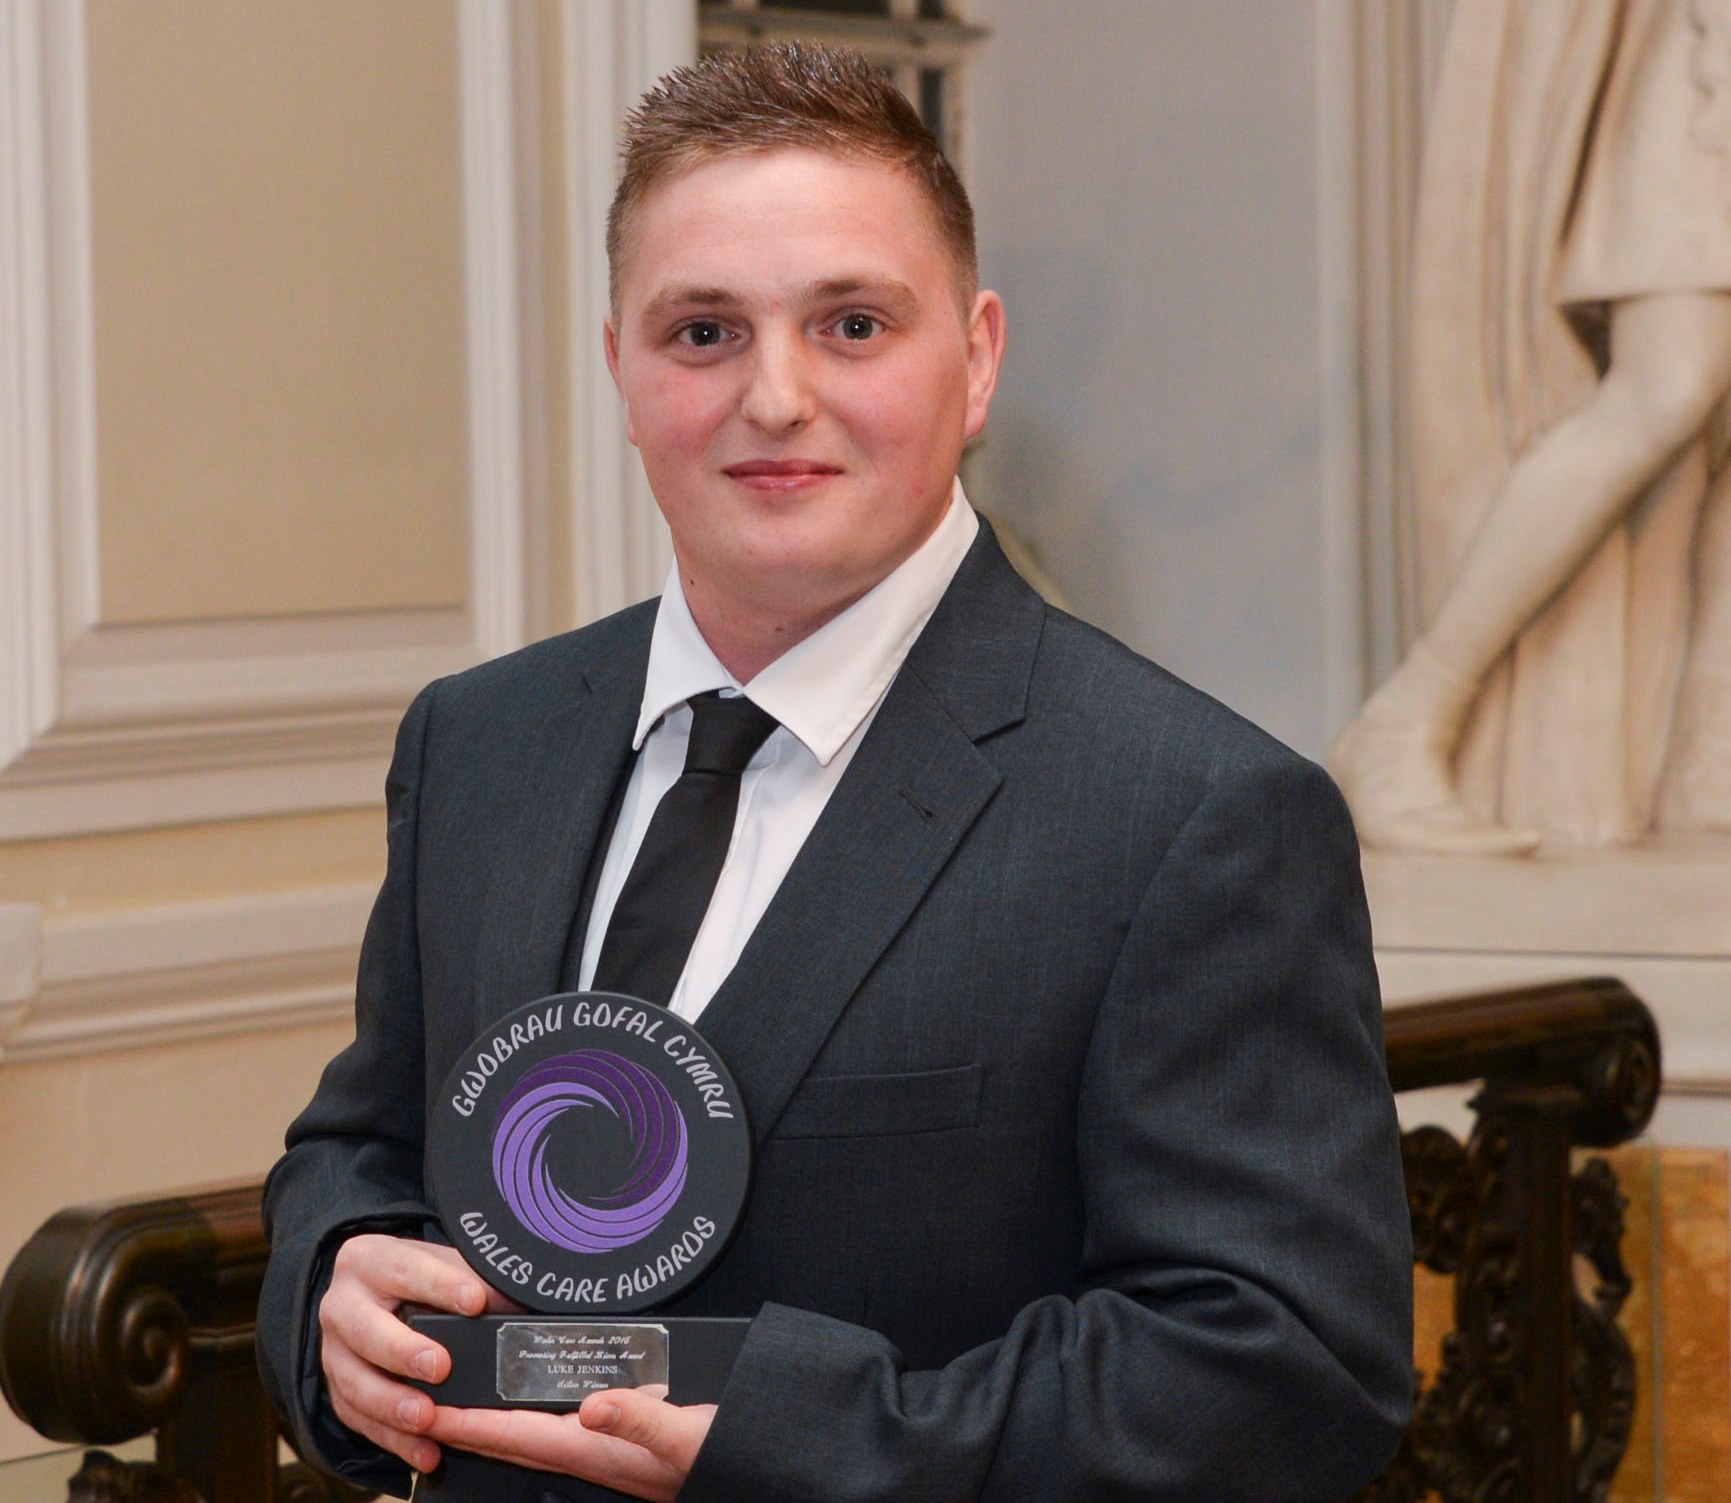 Former rugby player on the ball at awards ceremony